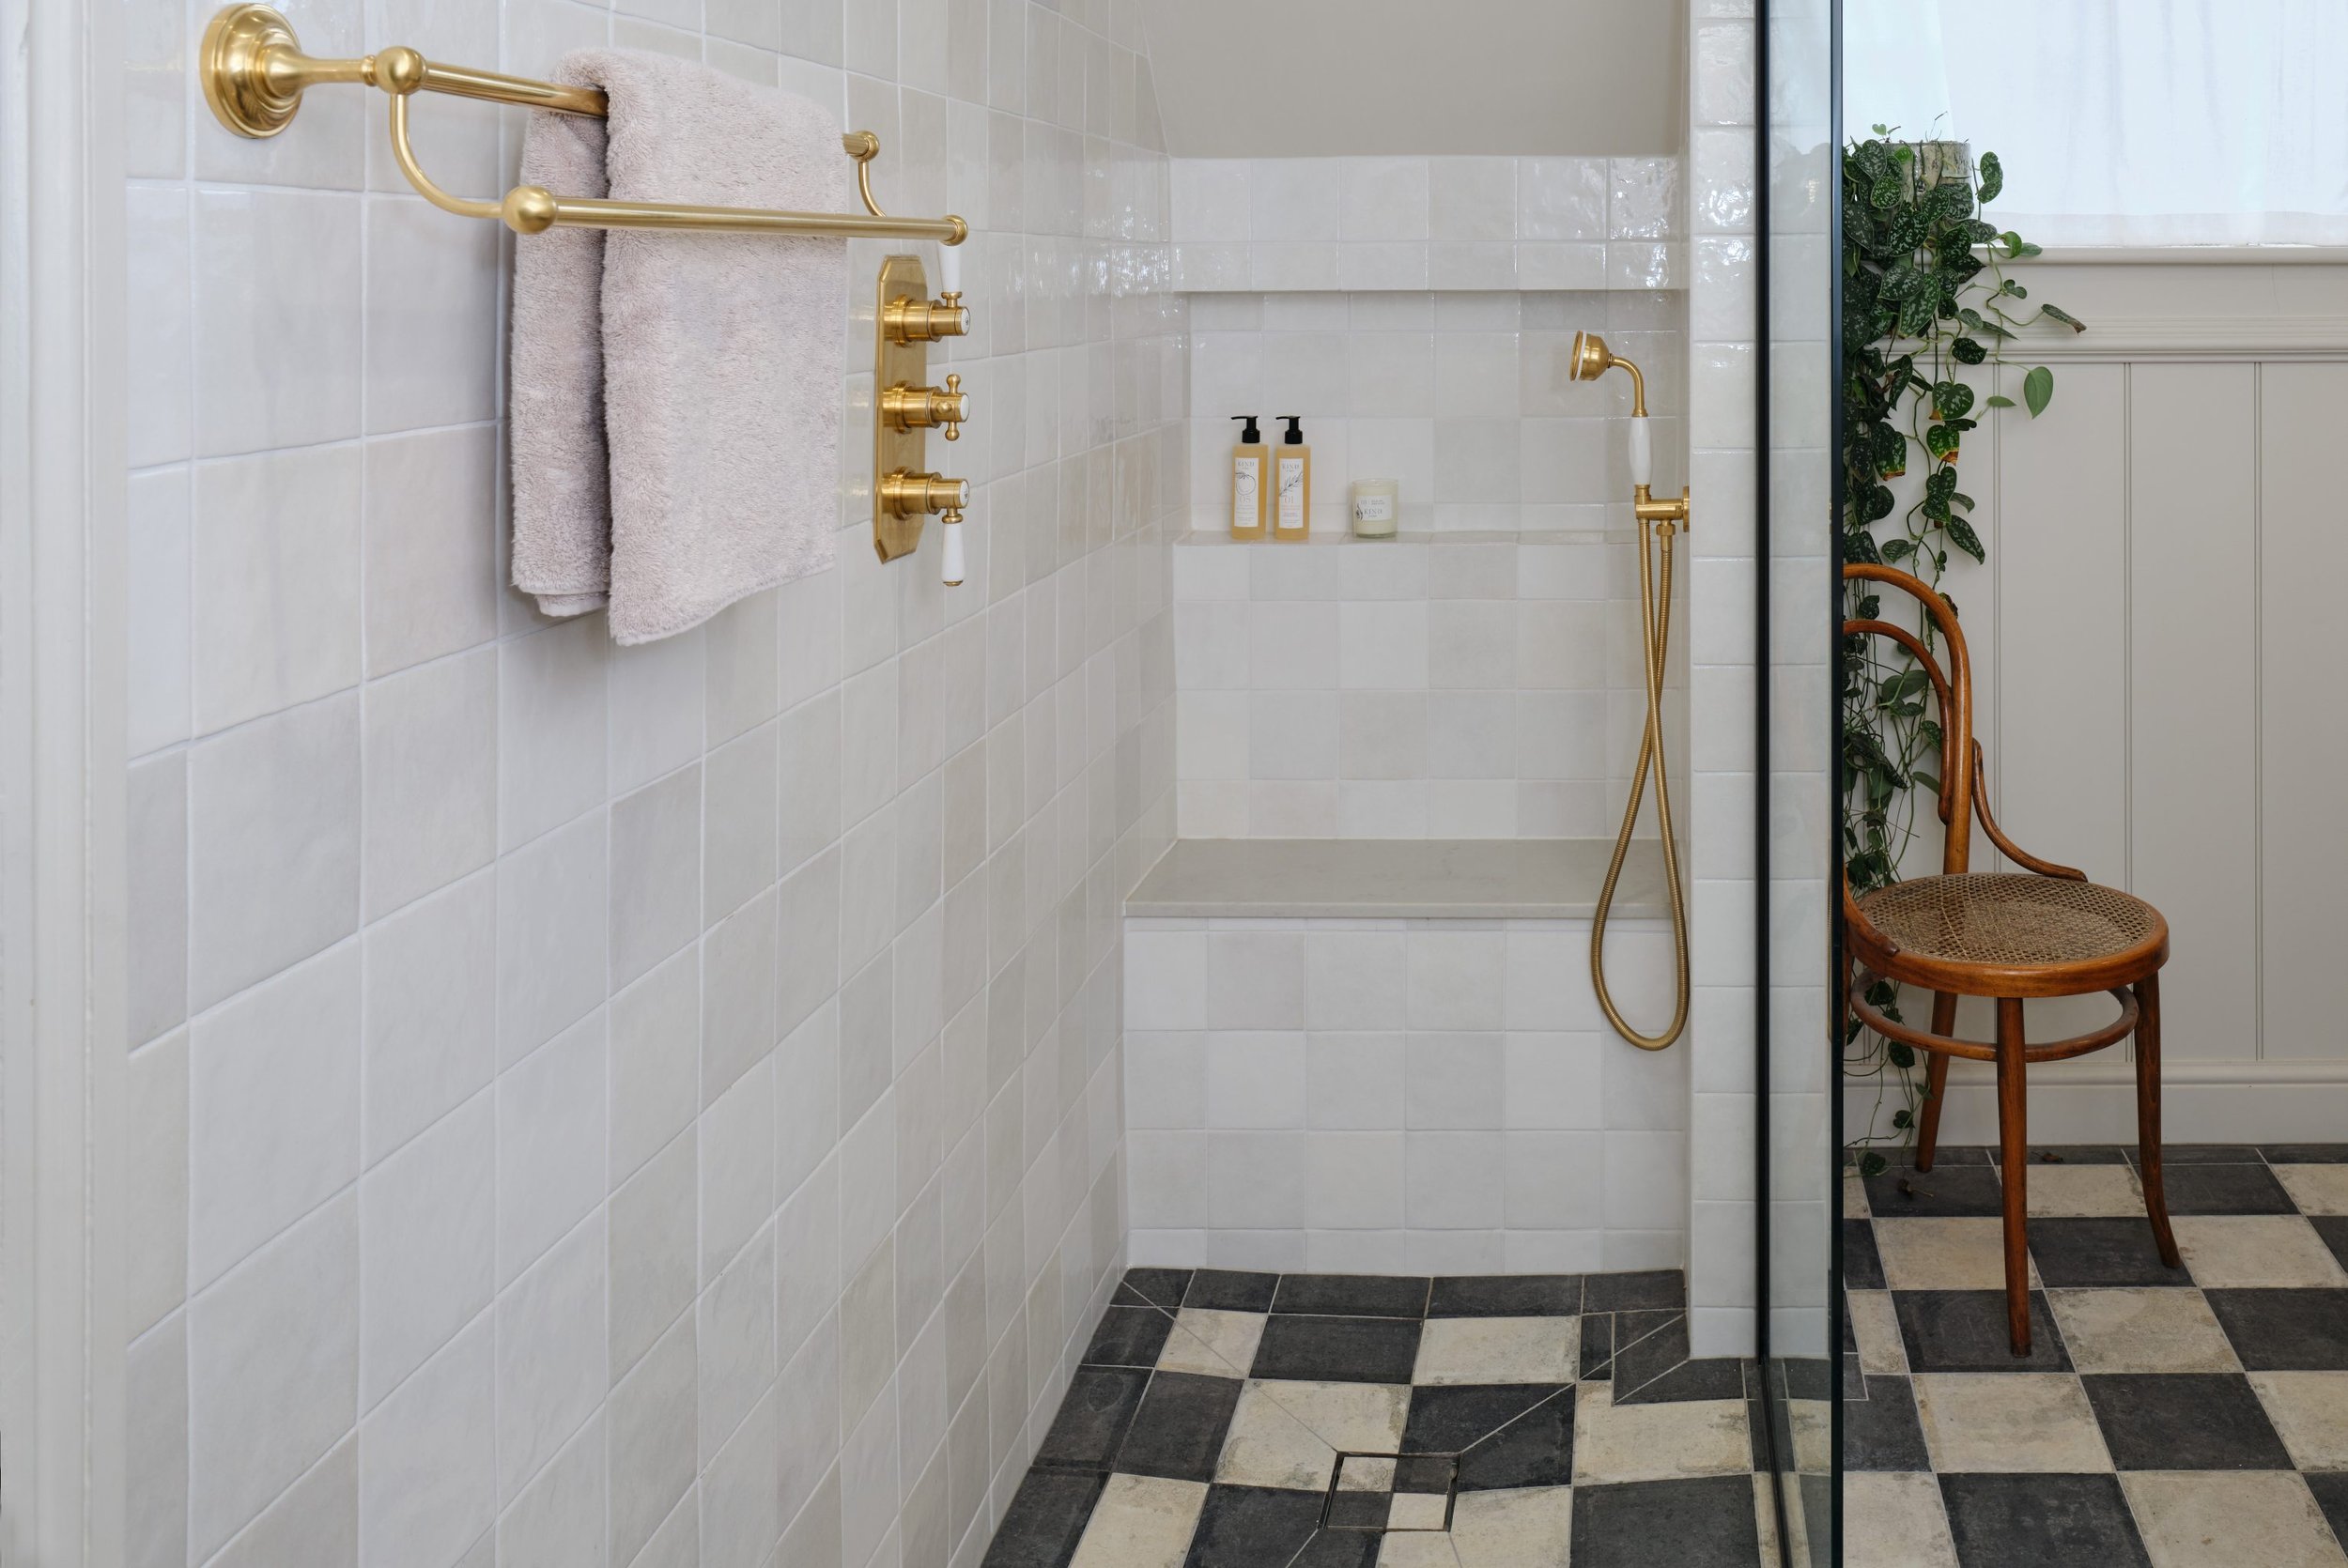 shower-area with-chequered-bathroom-floor-and-gold-brassware.jpg